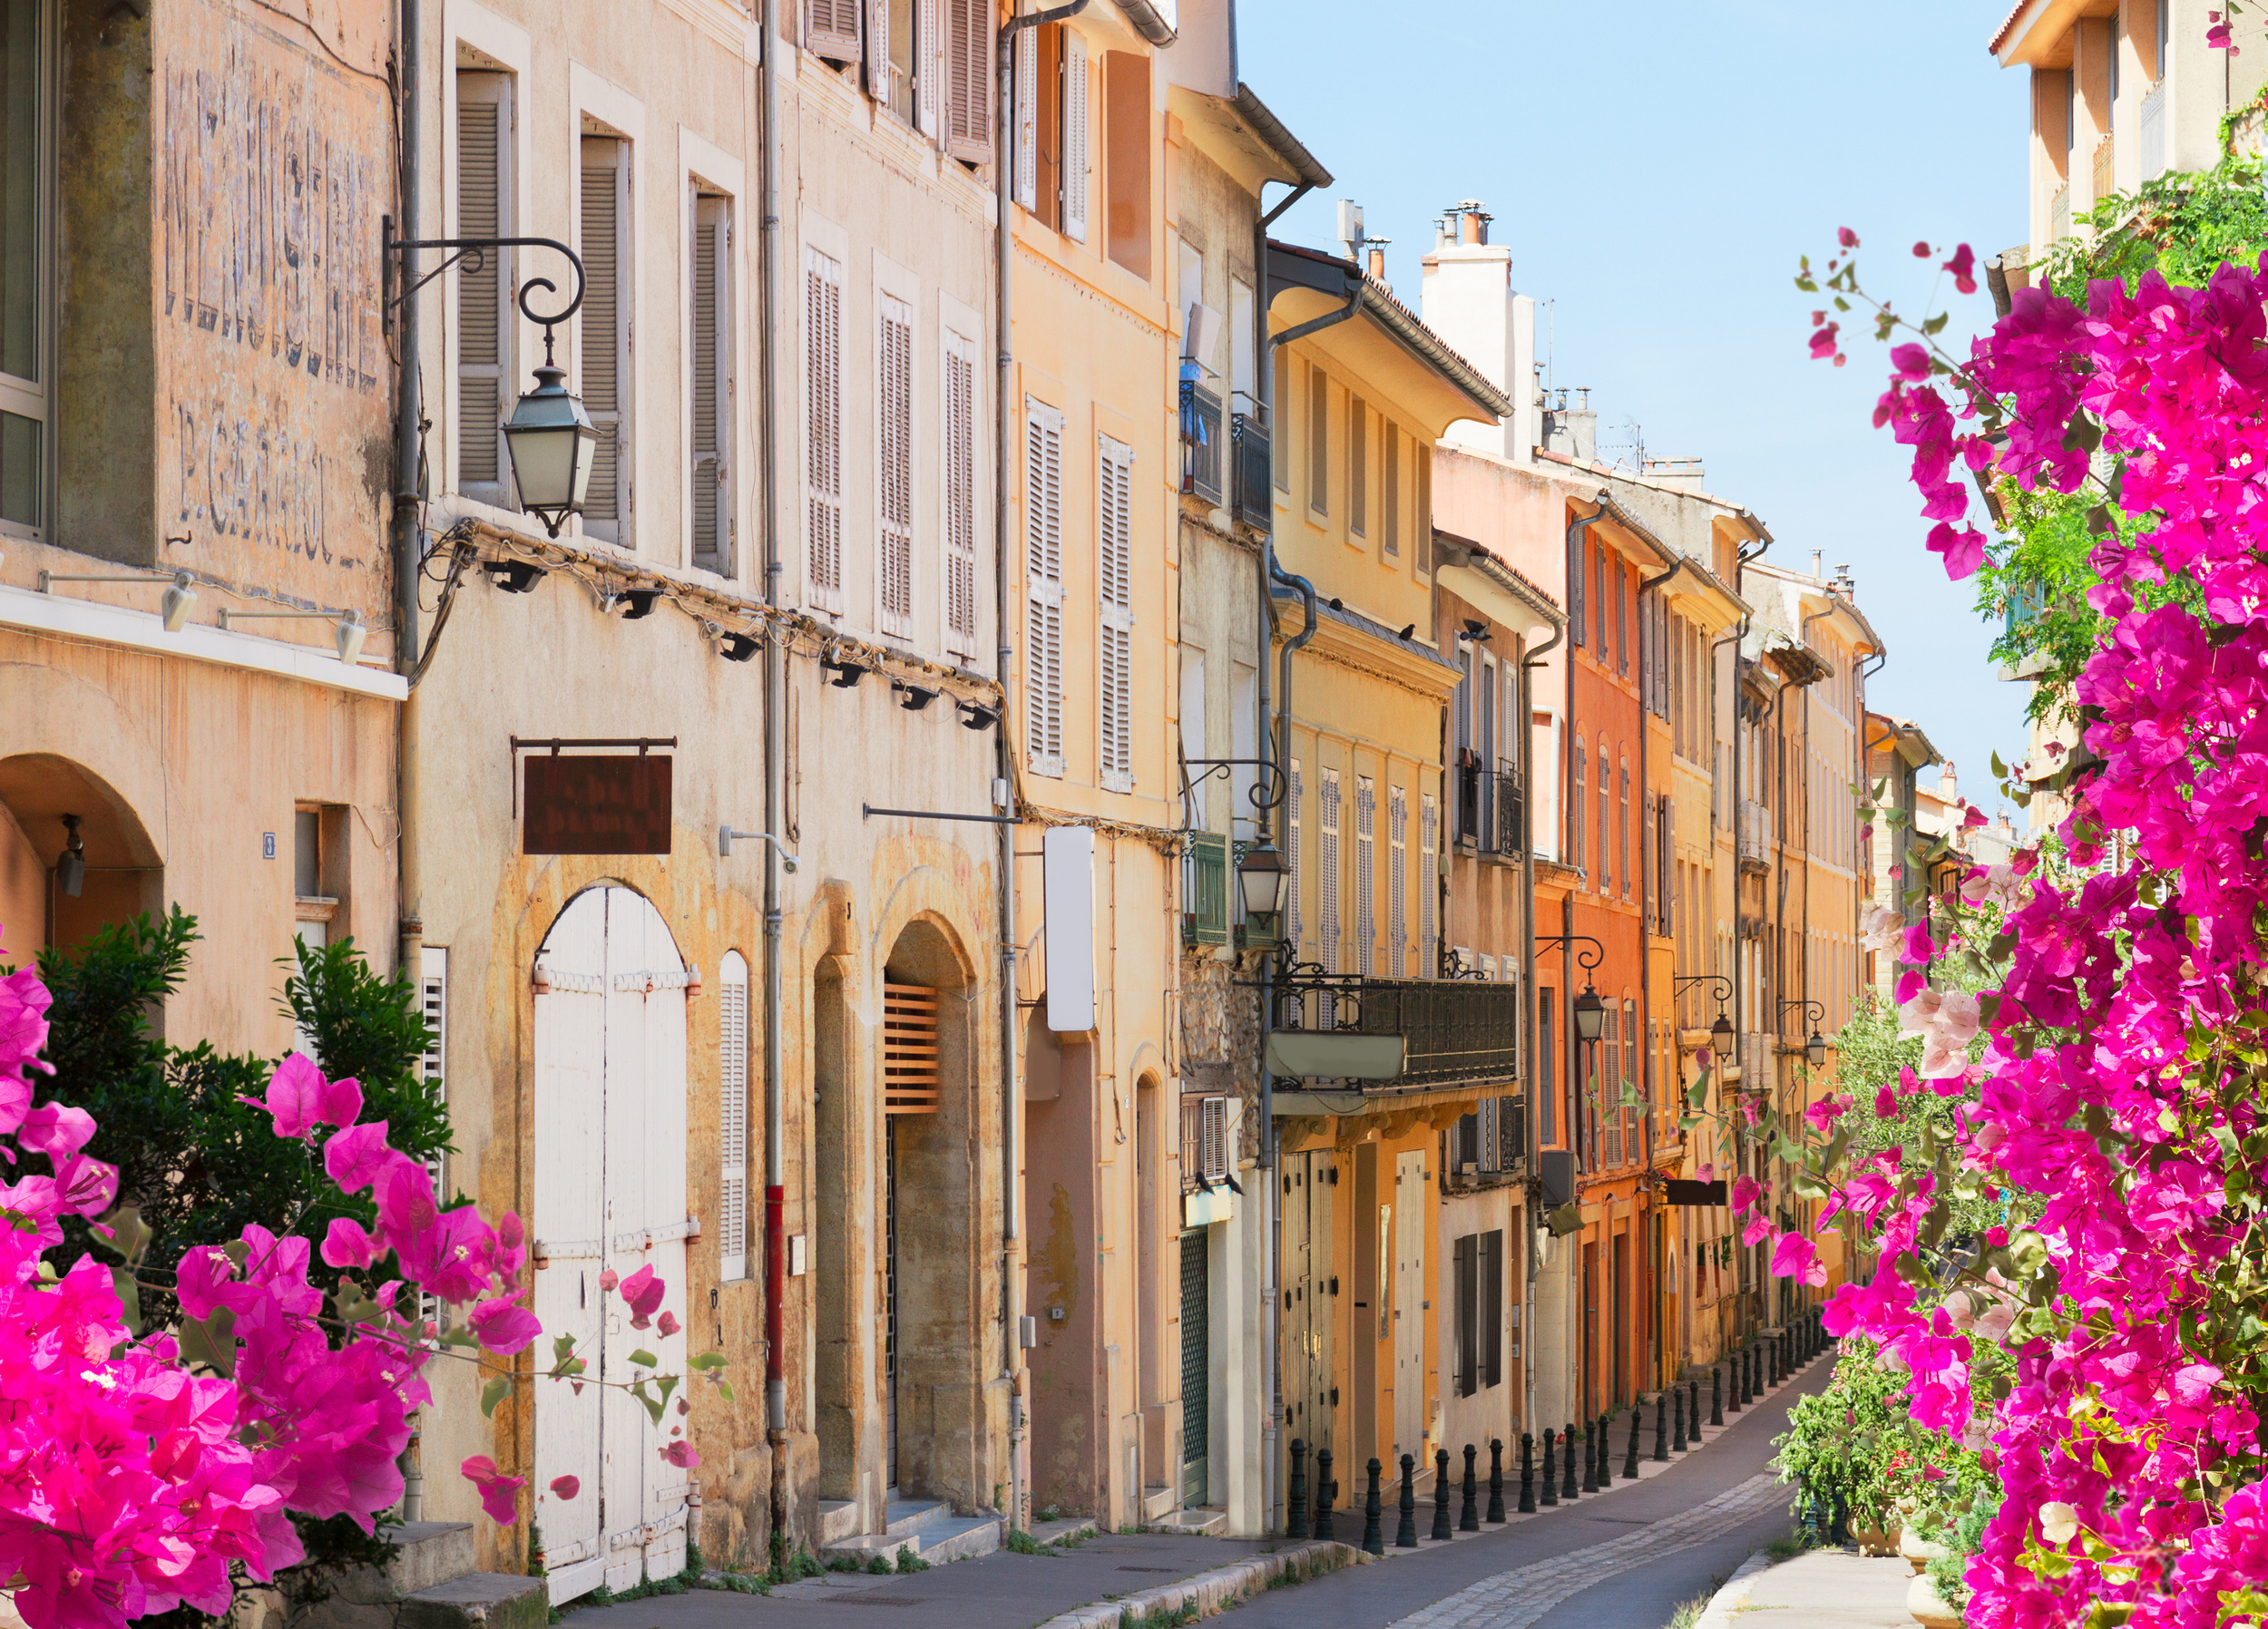 <p>Just north of Marseille is this picture-perfect southern France town. There isn't much in the way of sites, but if you're in the mood to walk around and shop leisurely at some of the best boutiques in France, Aix is your place.</p><p><a href='https://www.msn.com/en-us/community/channel/vid-cj9pqbr0vn9in2b6ddcd8sfgpfq6x6utp44fssrv6mc2gtybw0us'>Follow us on MSN to see more of our exclusive lifestyle content.</a></p>